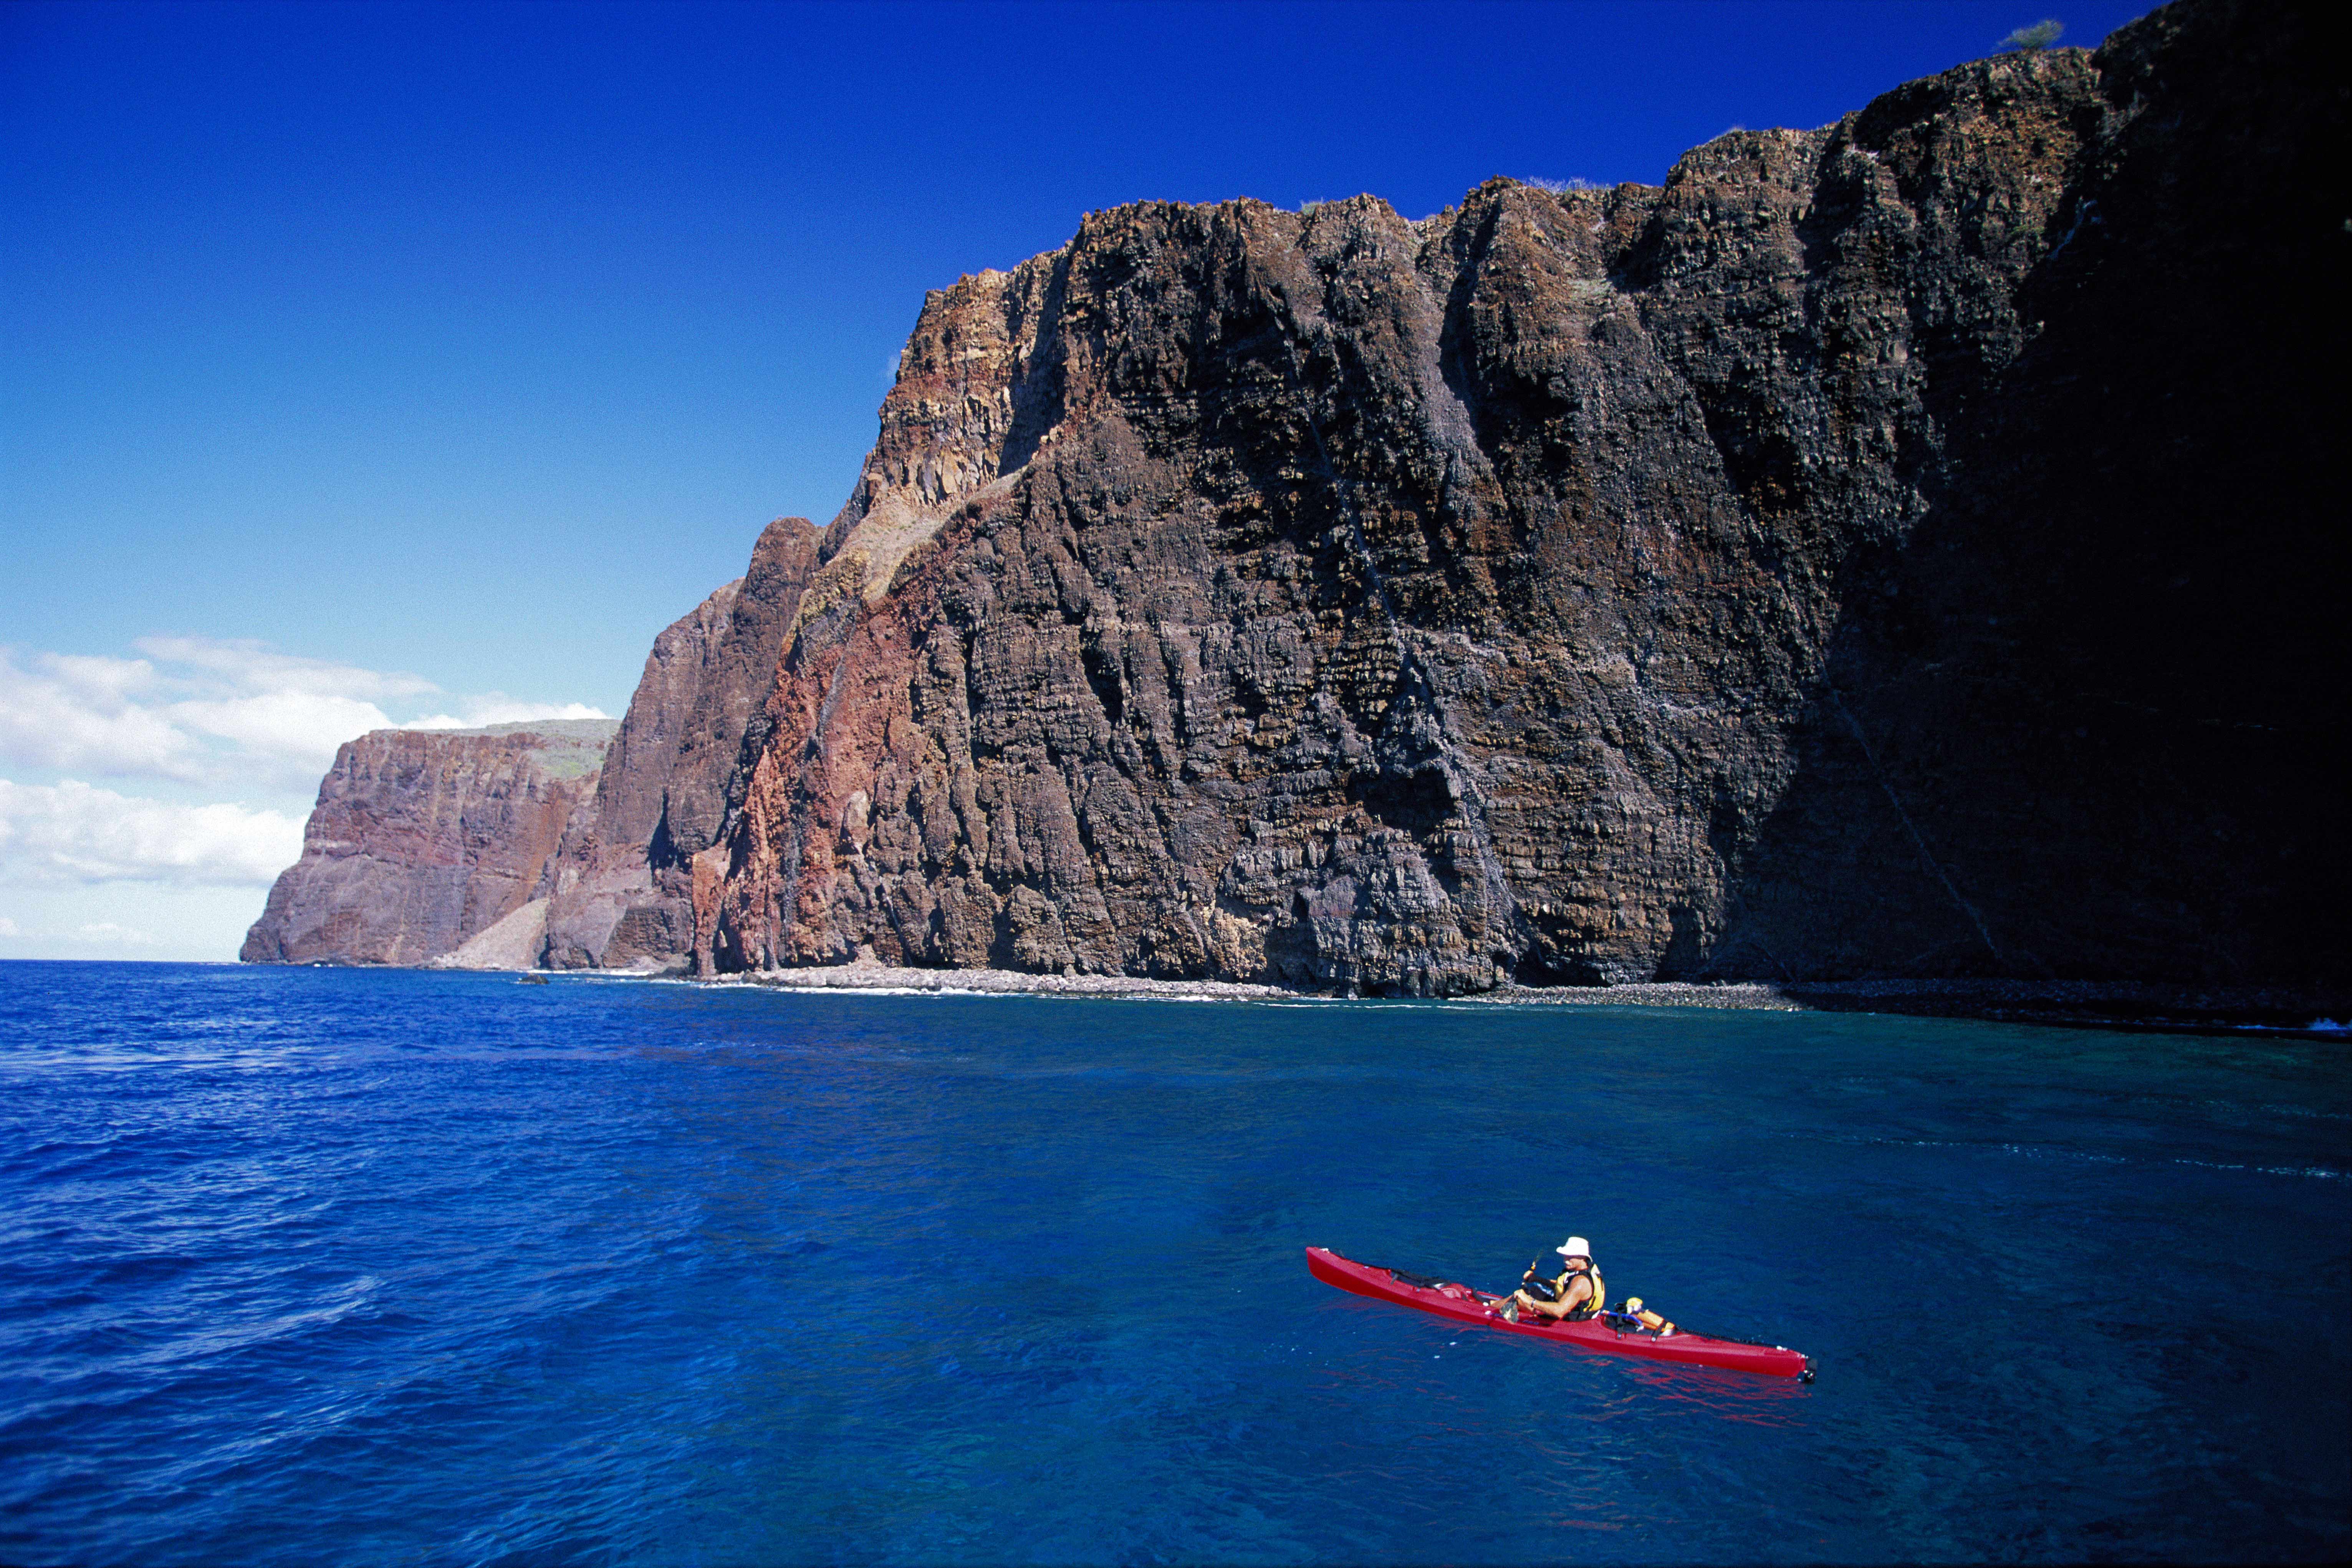 A man kayaks near the cliffs of southern Lana'i. Image by Dahlquist Ron / Getty